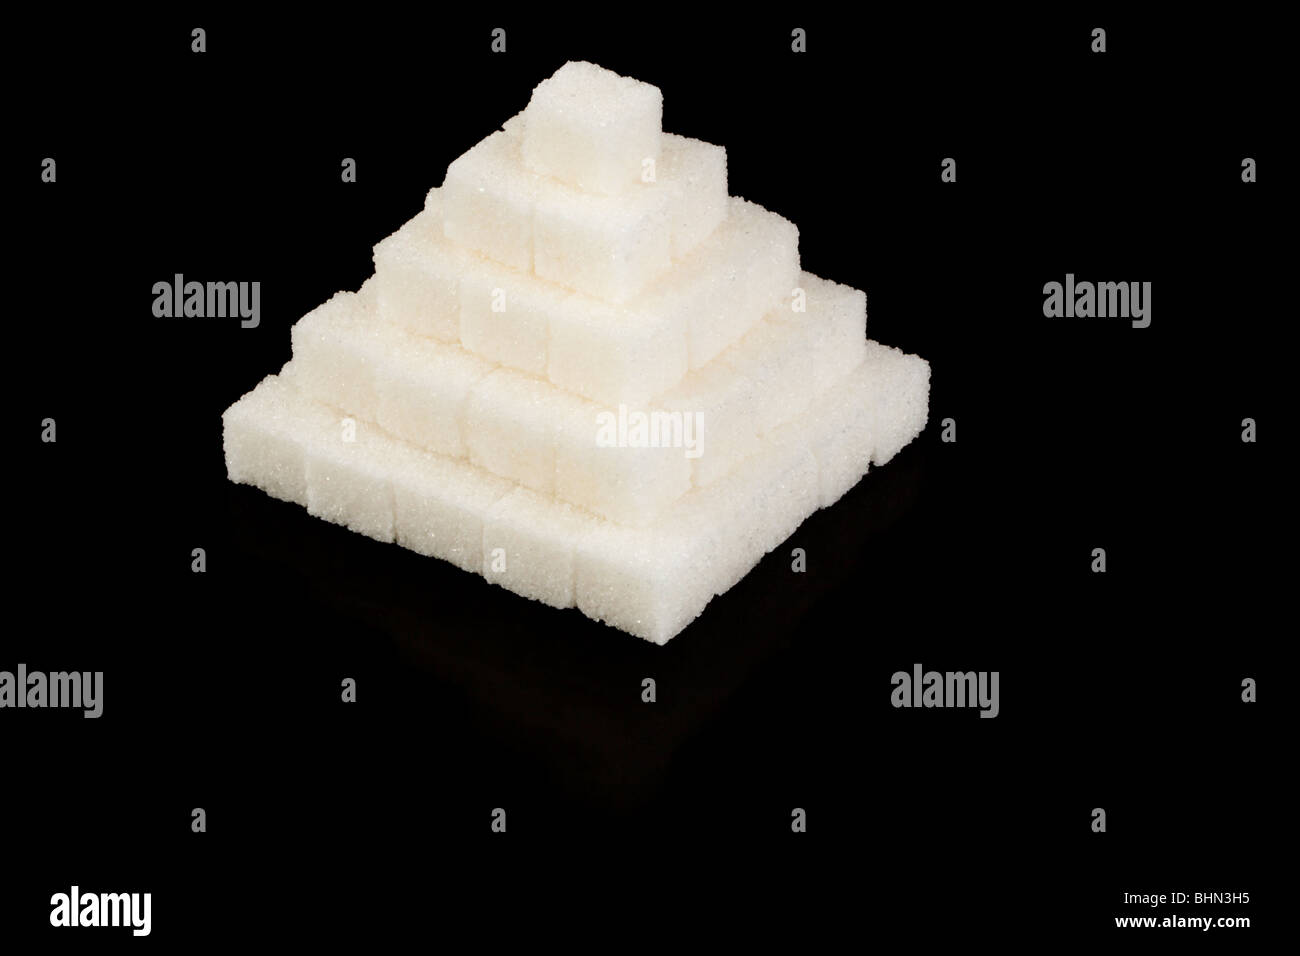 Pyramid from refined sugar on a black background Stock Photo